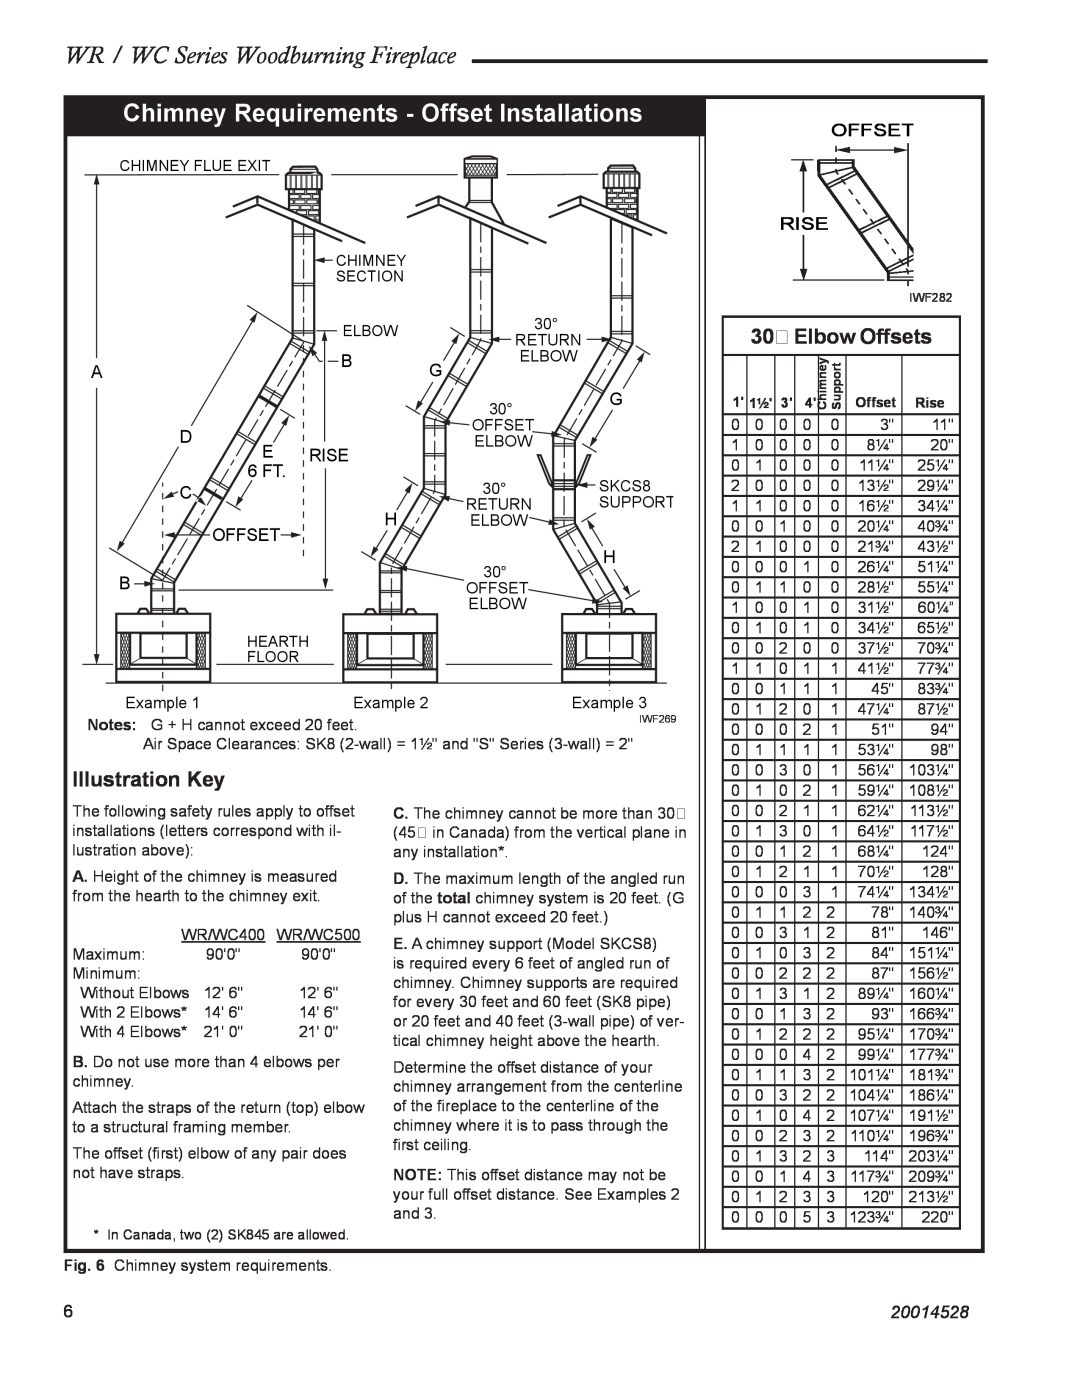 Monessen Hearth WR500, WC400 Chimney Requirements - Offset Installations, 30˚ Elbow Offsets, Illustration Key, 20014528 